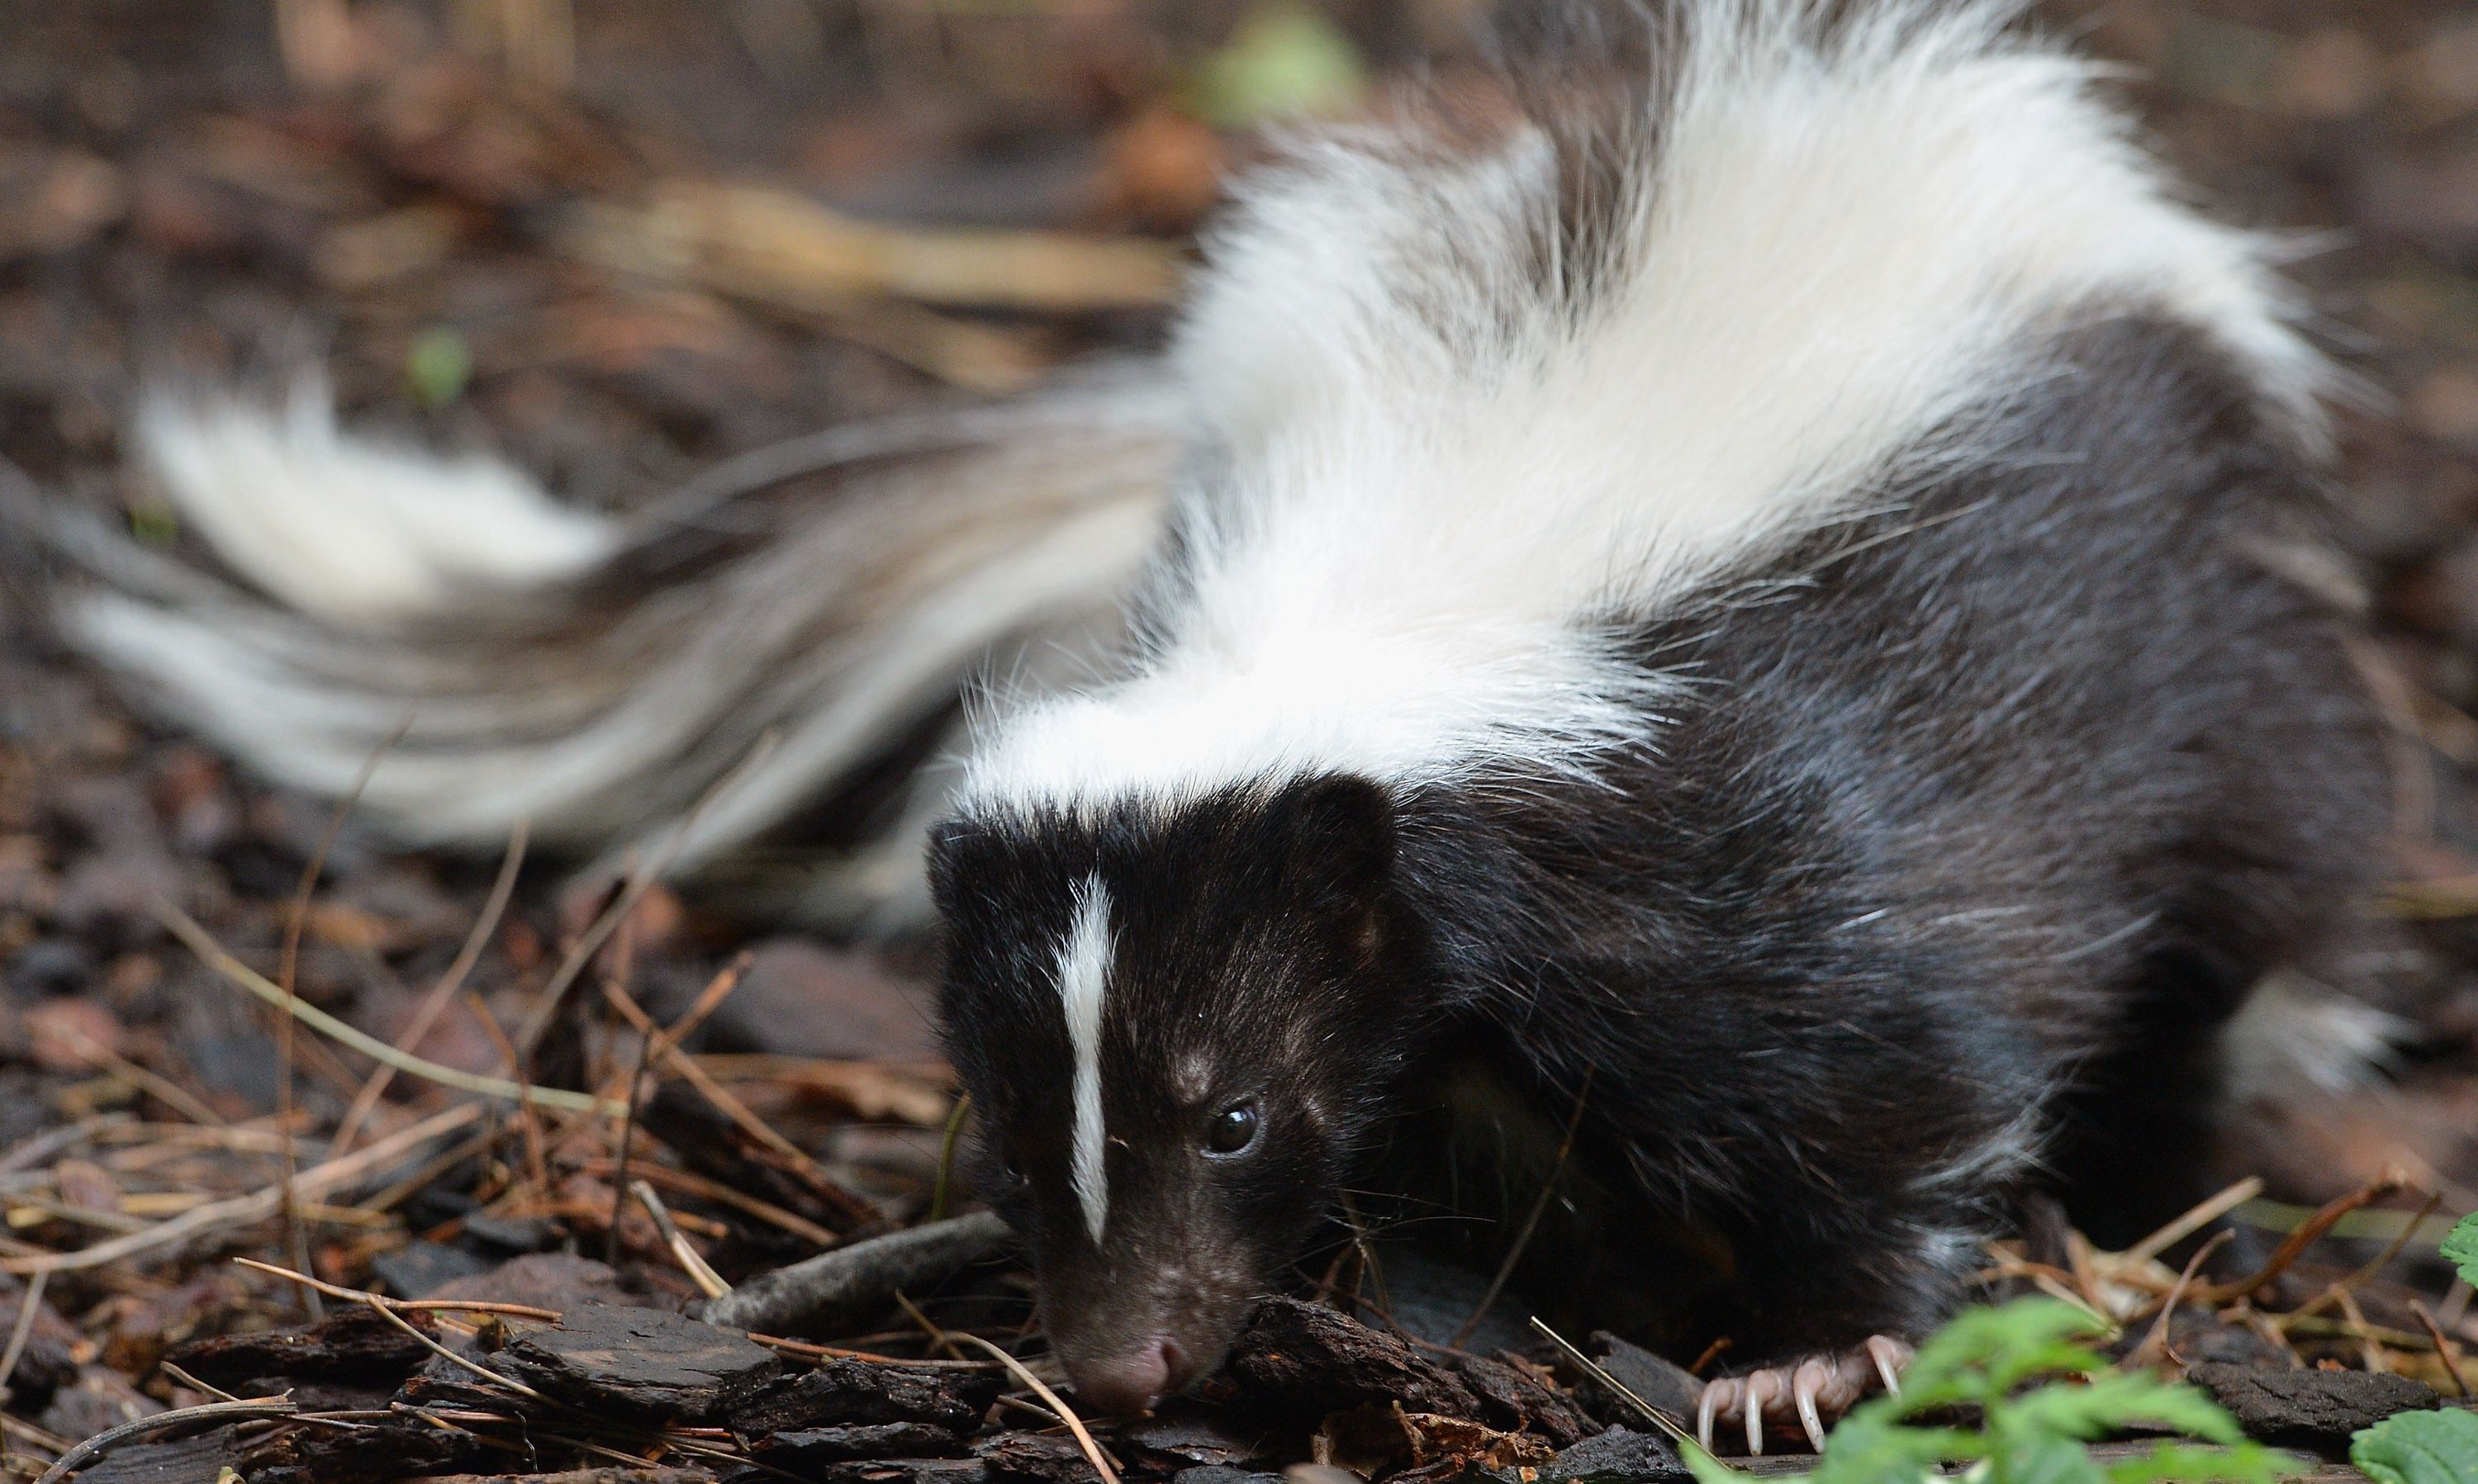 Remove Skunk Odor from Clothes and Camping Equipment